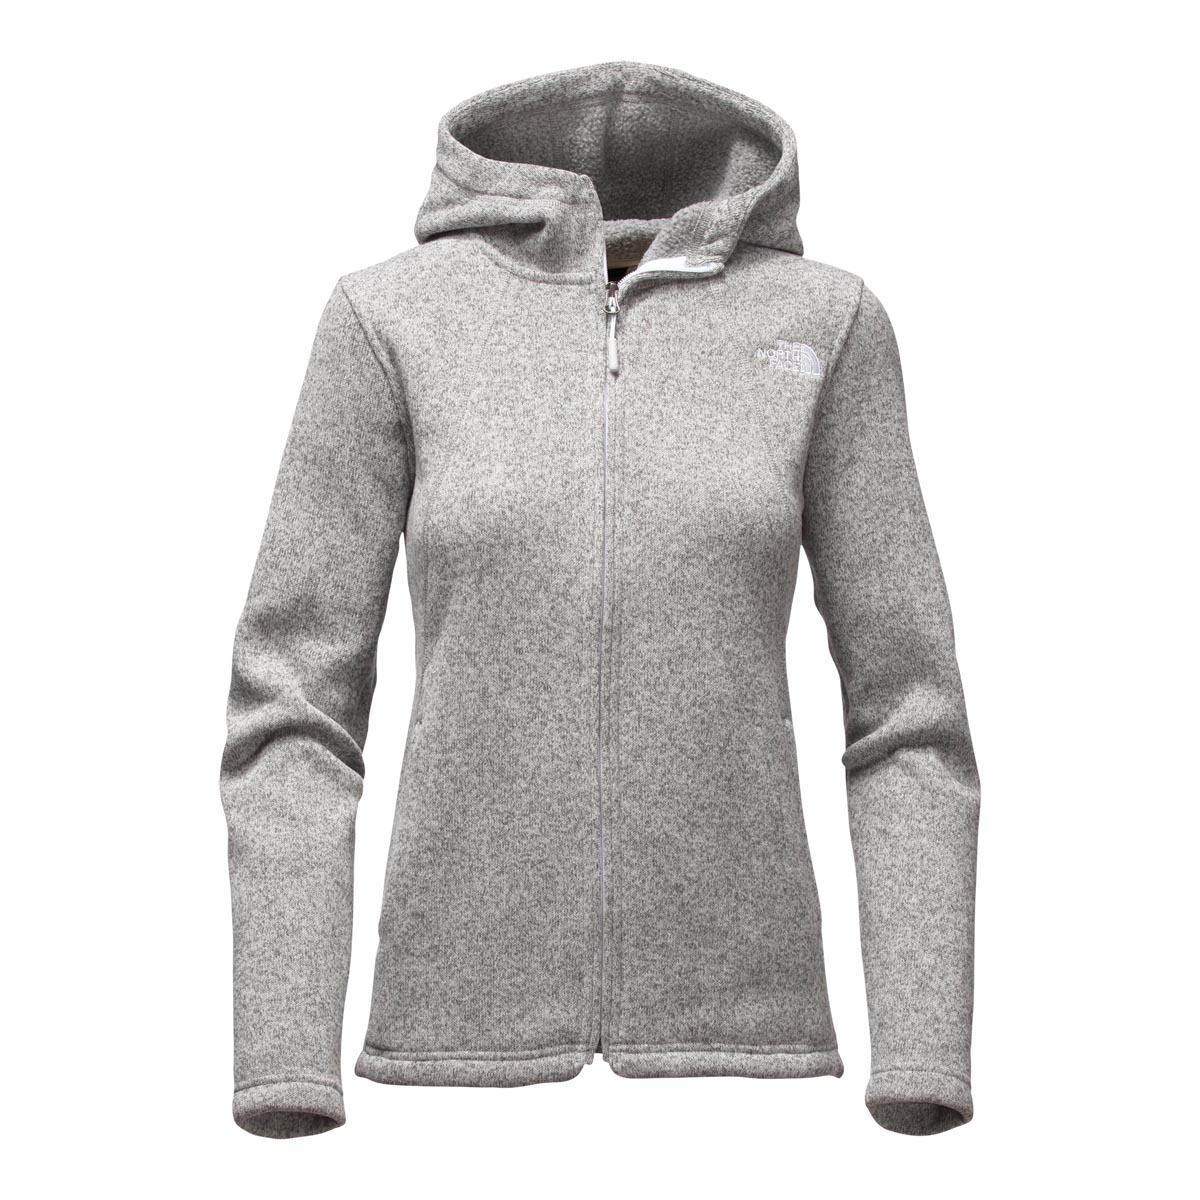 The North Face Women's Crescent Full Zip Hoodie Discontinued Pricing